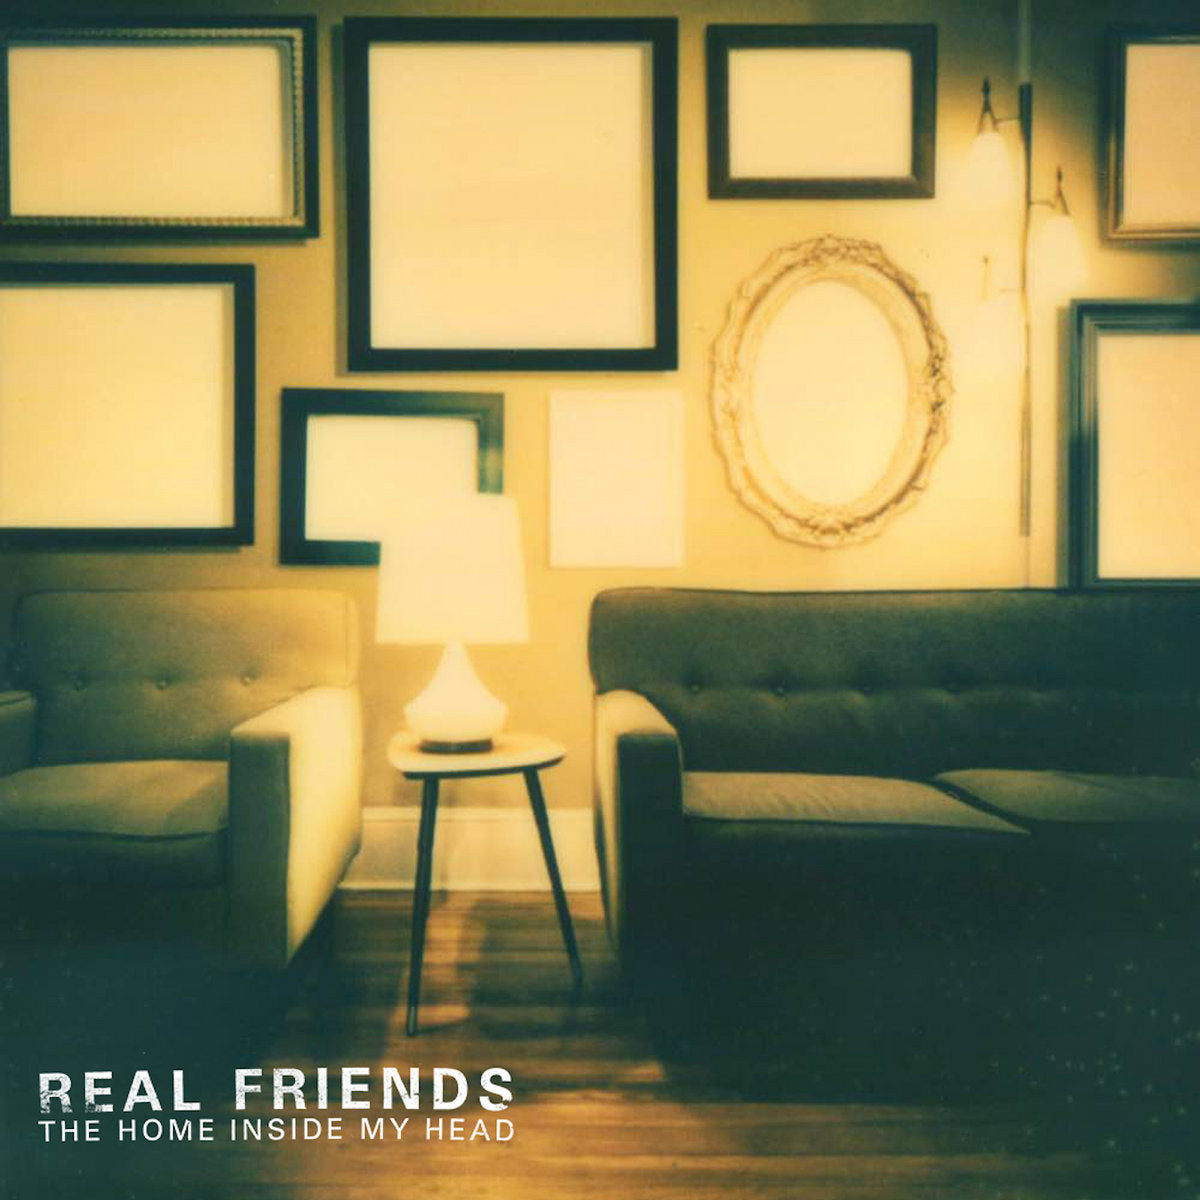 Real Friends "The Home Inside My Head" CD